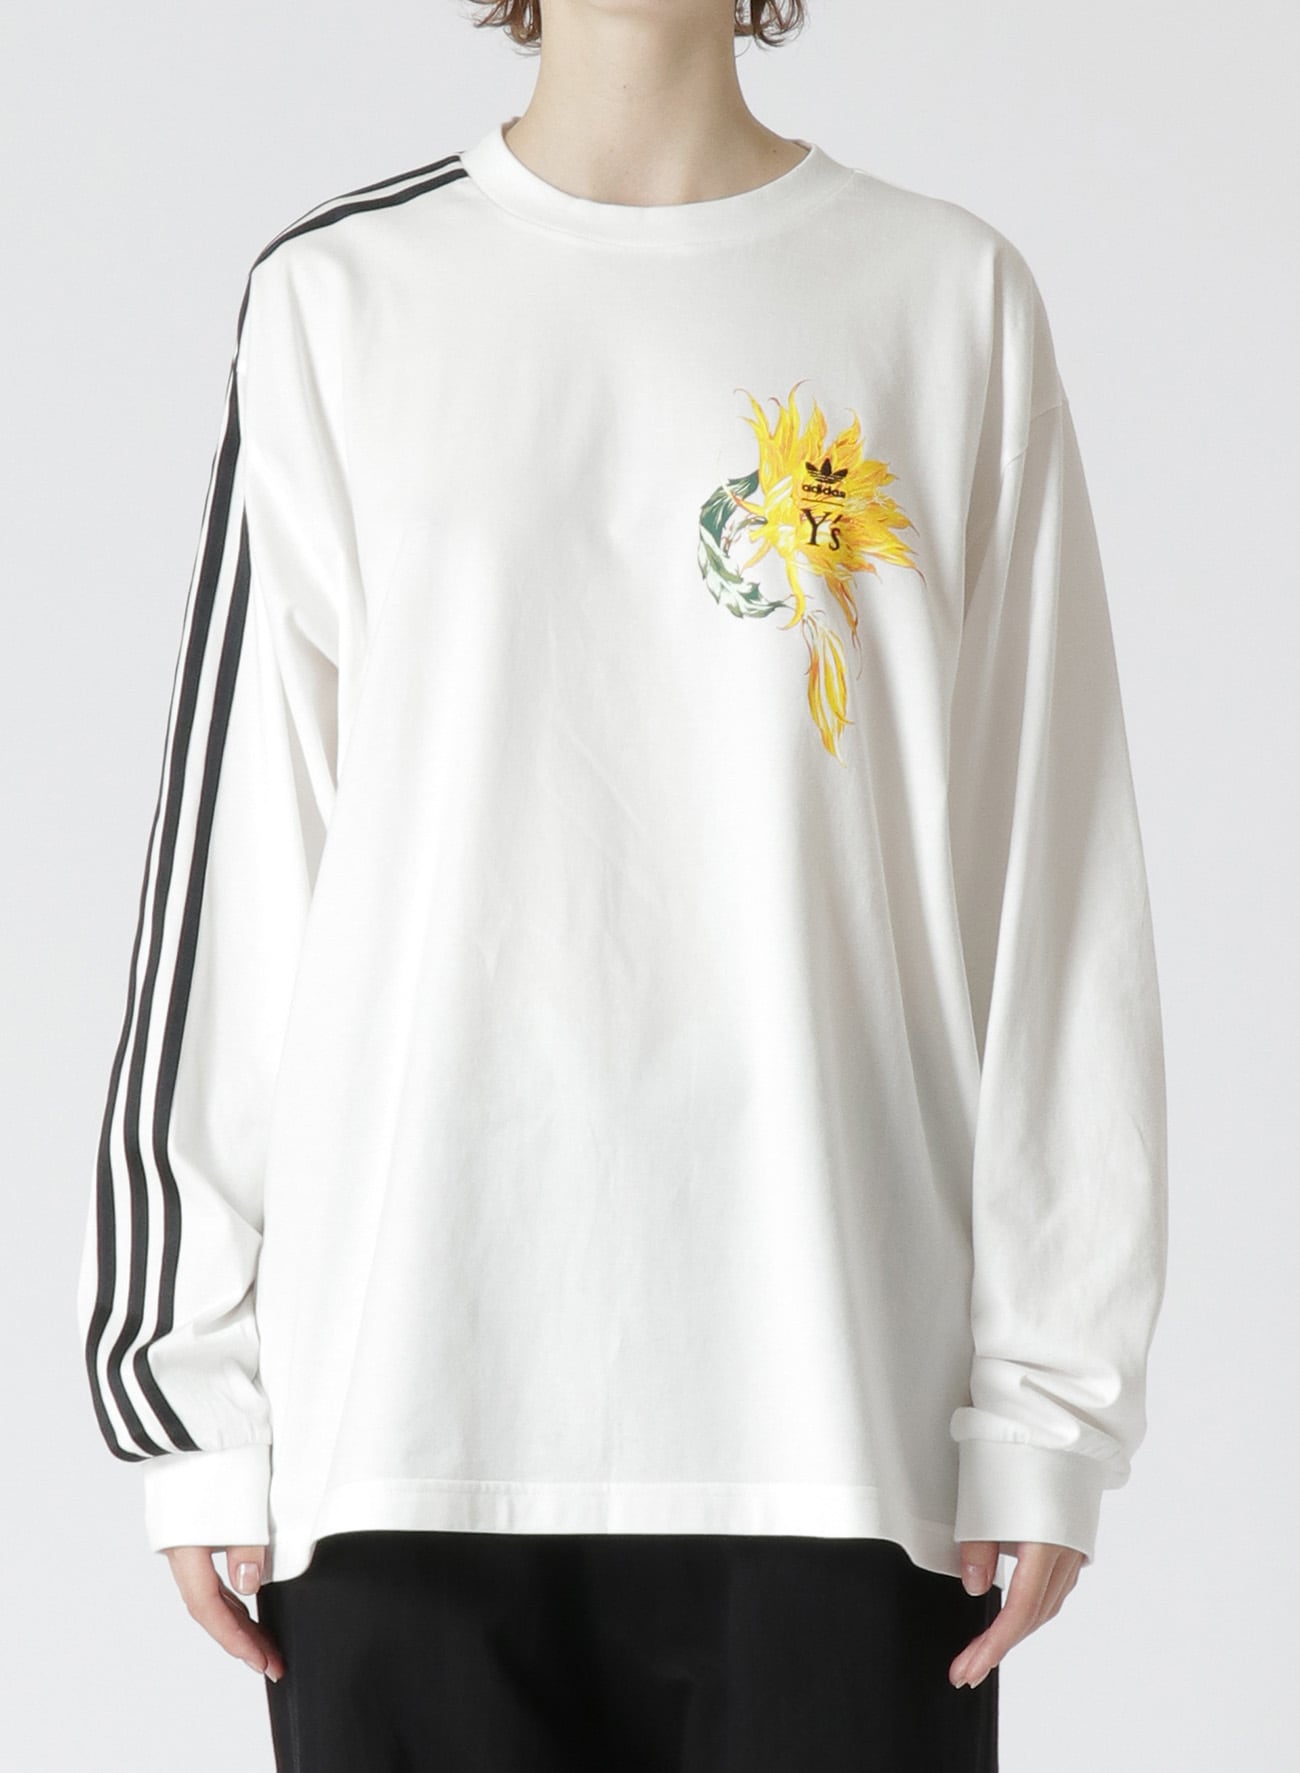 Y's x adidas]CACTUS FLOWER PRINT LONG T-SHIRT(XS White): Y's｜THE 